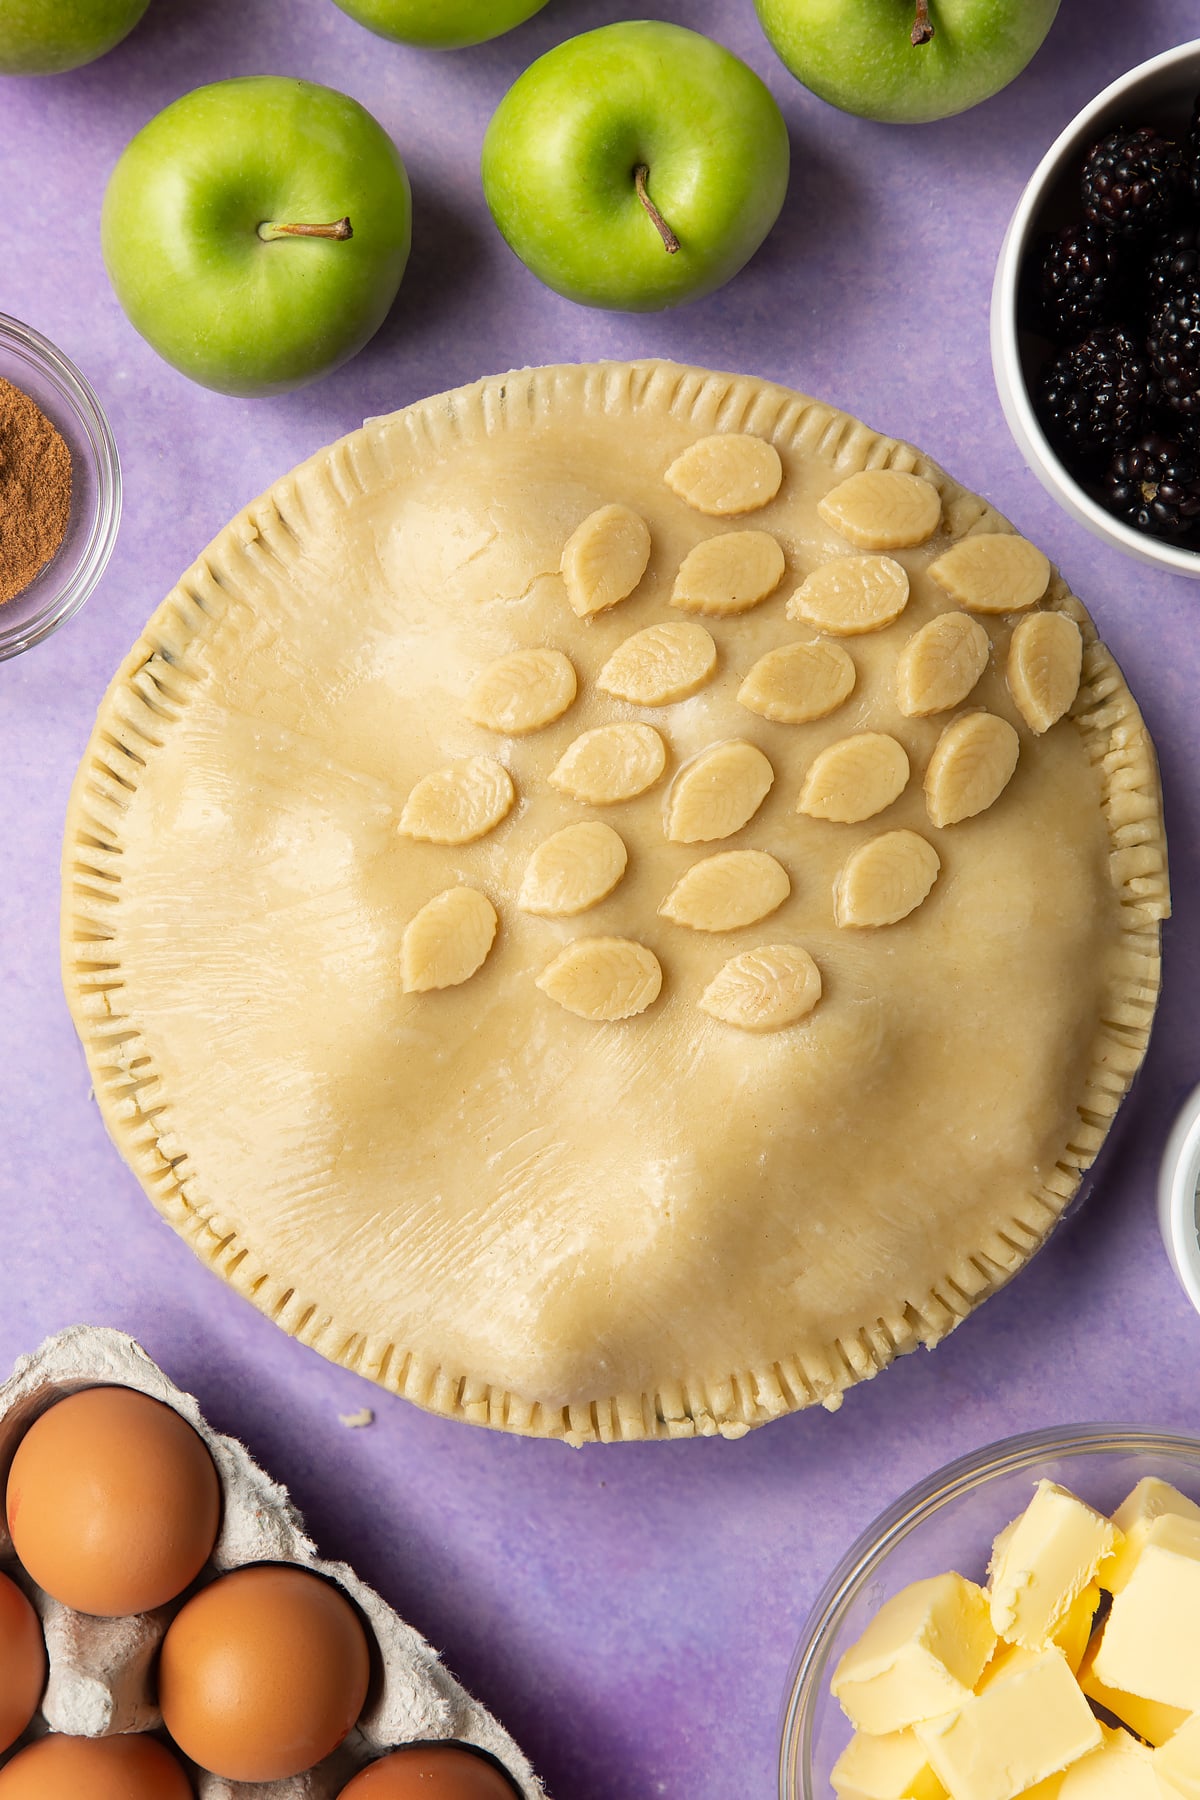 A raw apple and blackberry pie in a tin. The top has been brushed with egg white and decorated with pastry leaves.